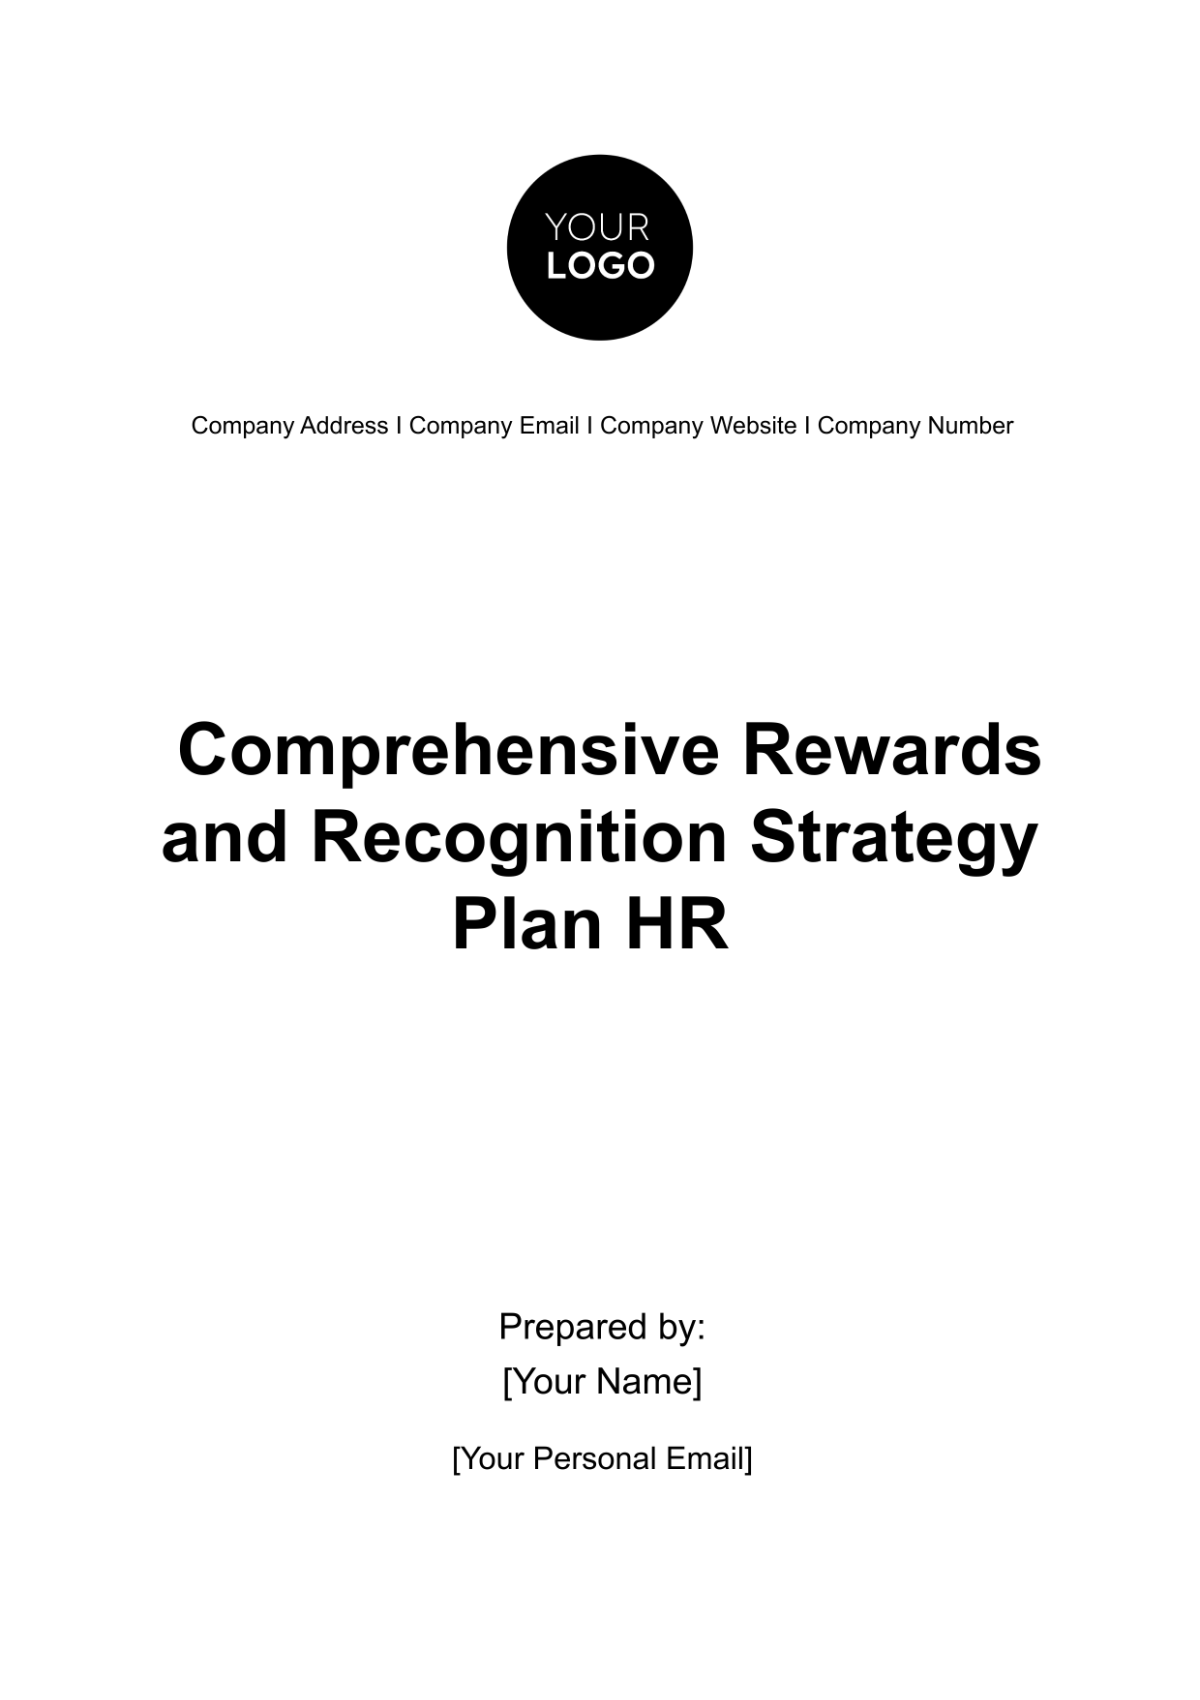 Free Comprehensive Rewards and Recognition Strategy Plan HR Template